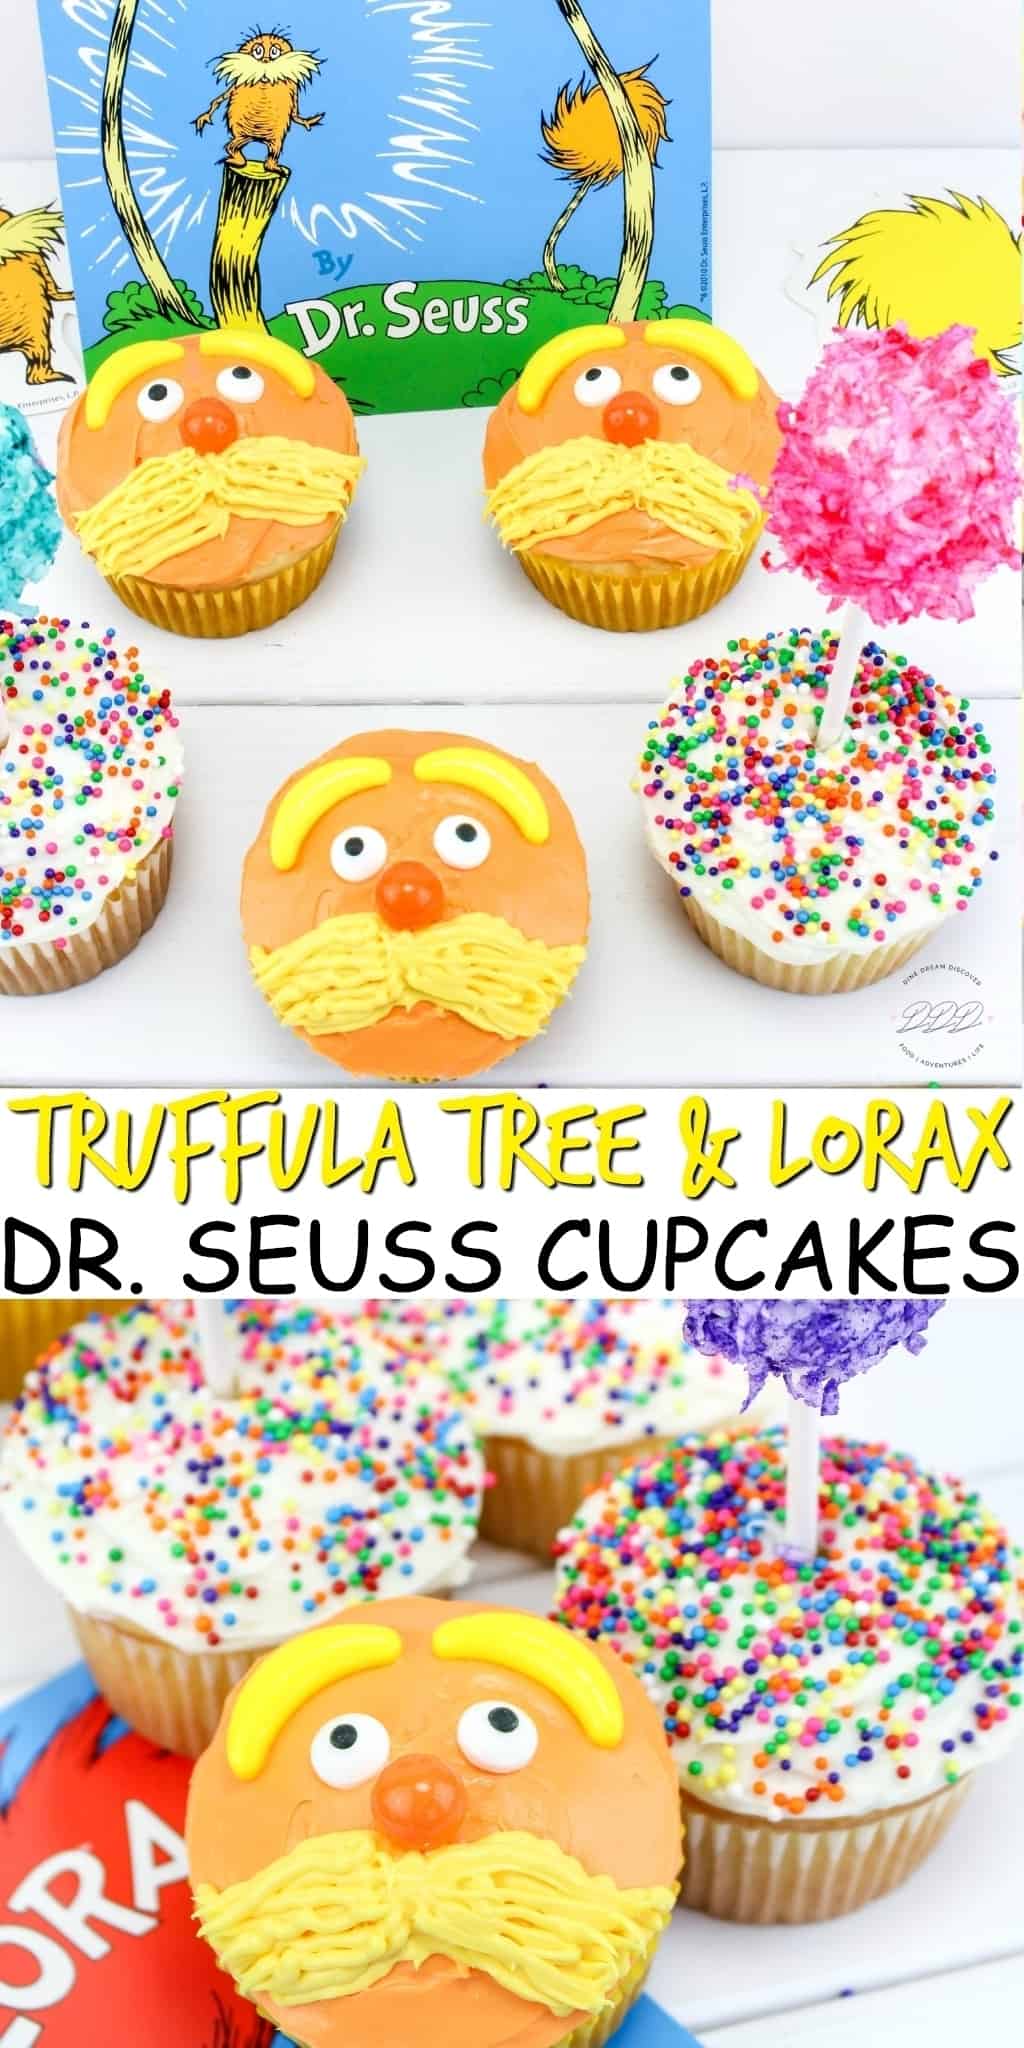 Today we are sharing our last Dr. Seuss recipe with the Truffula Tree and Lorax Cupcakes recipe in honor of his birthday. 